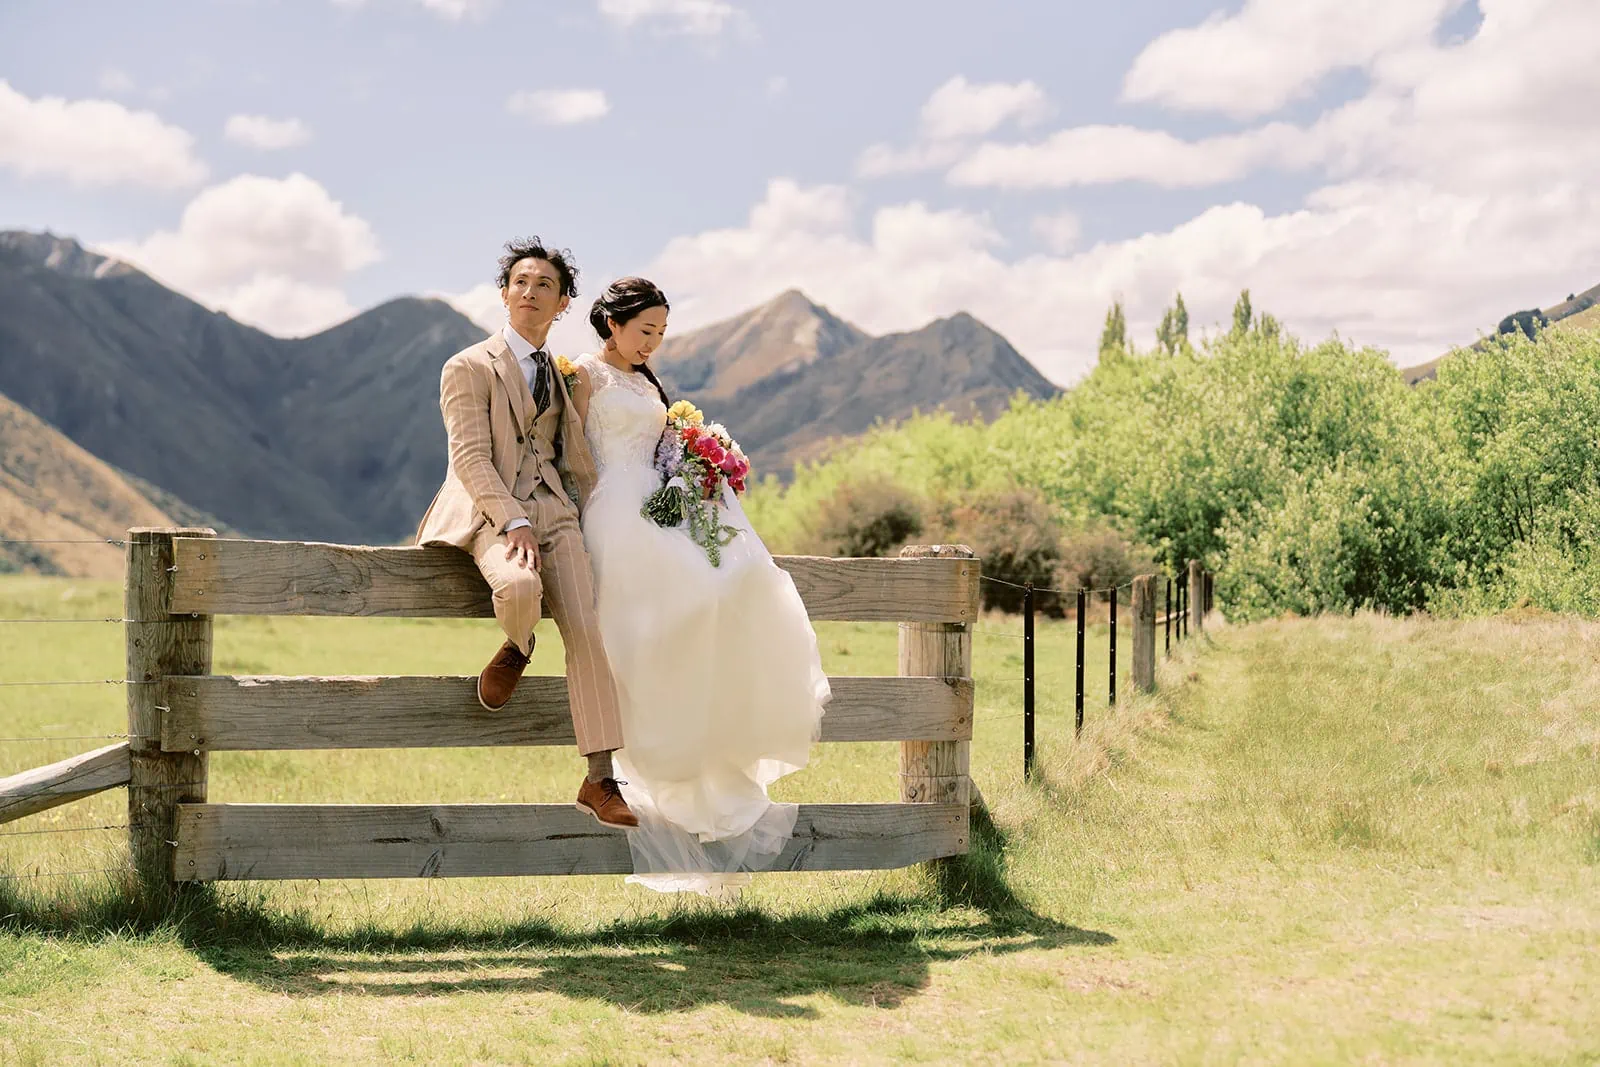 Queenstown Elopement Heli Wedding Photographer クイーンズタウン結婚式 | A bride and groom sitting on a fence overlooking the picturesque mountains of Queenstown.